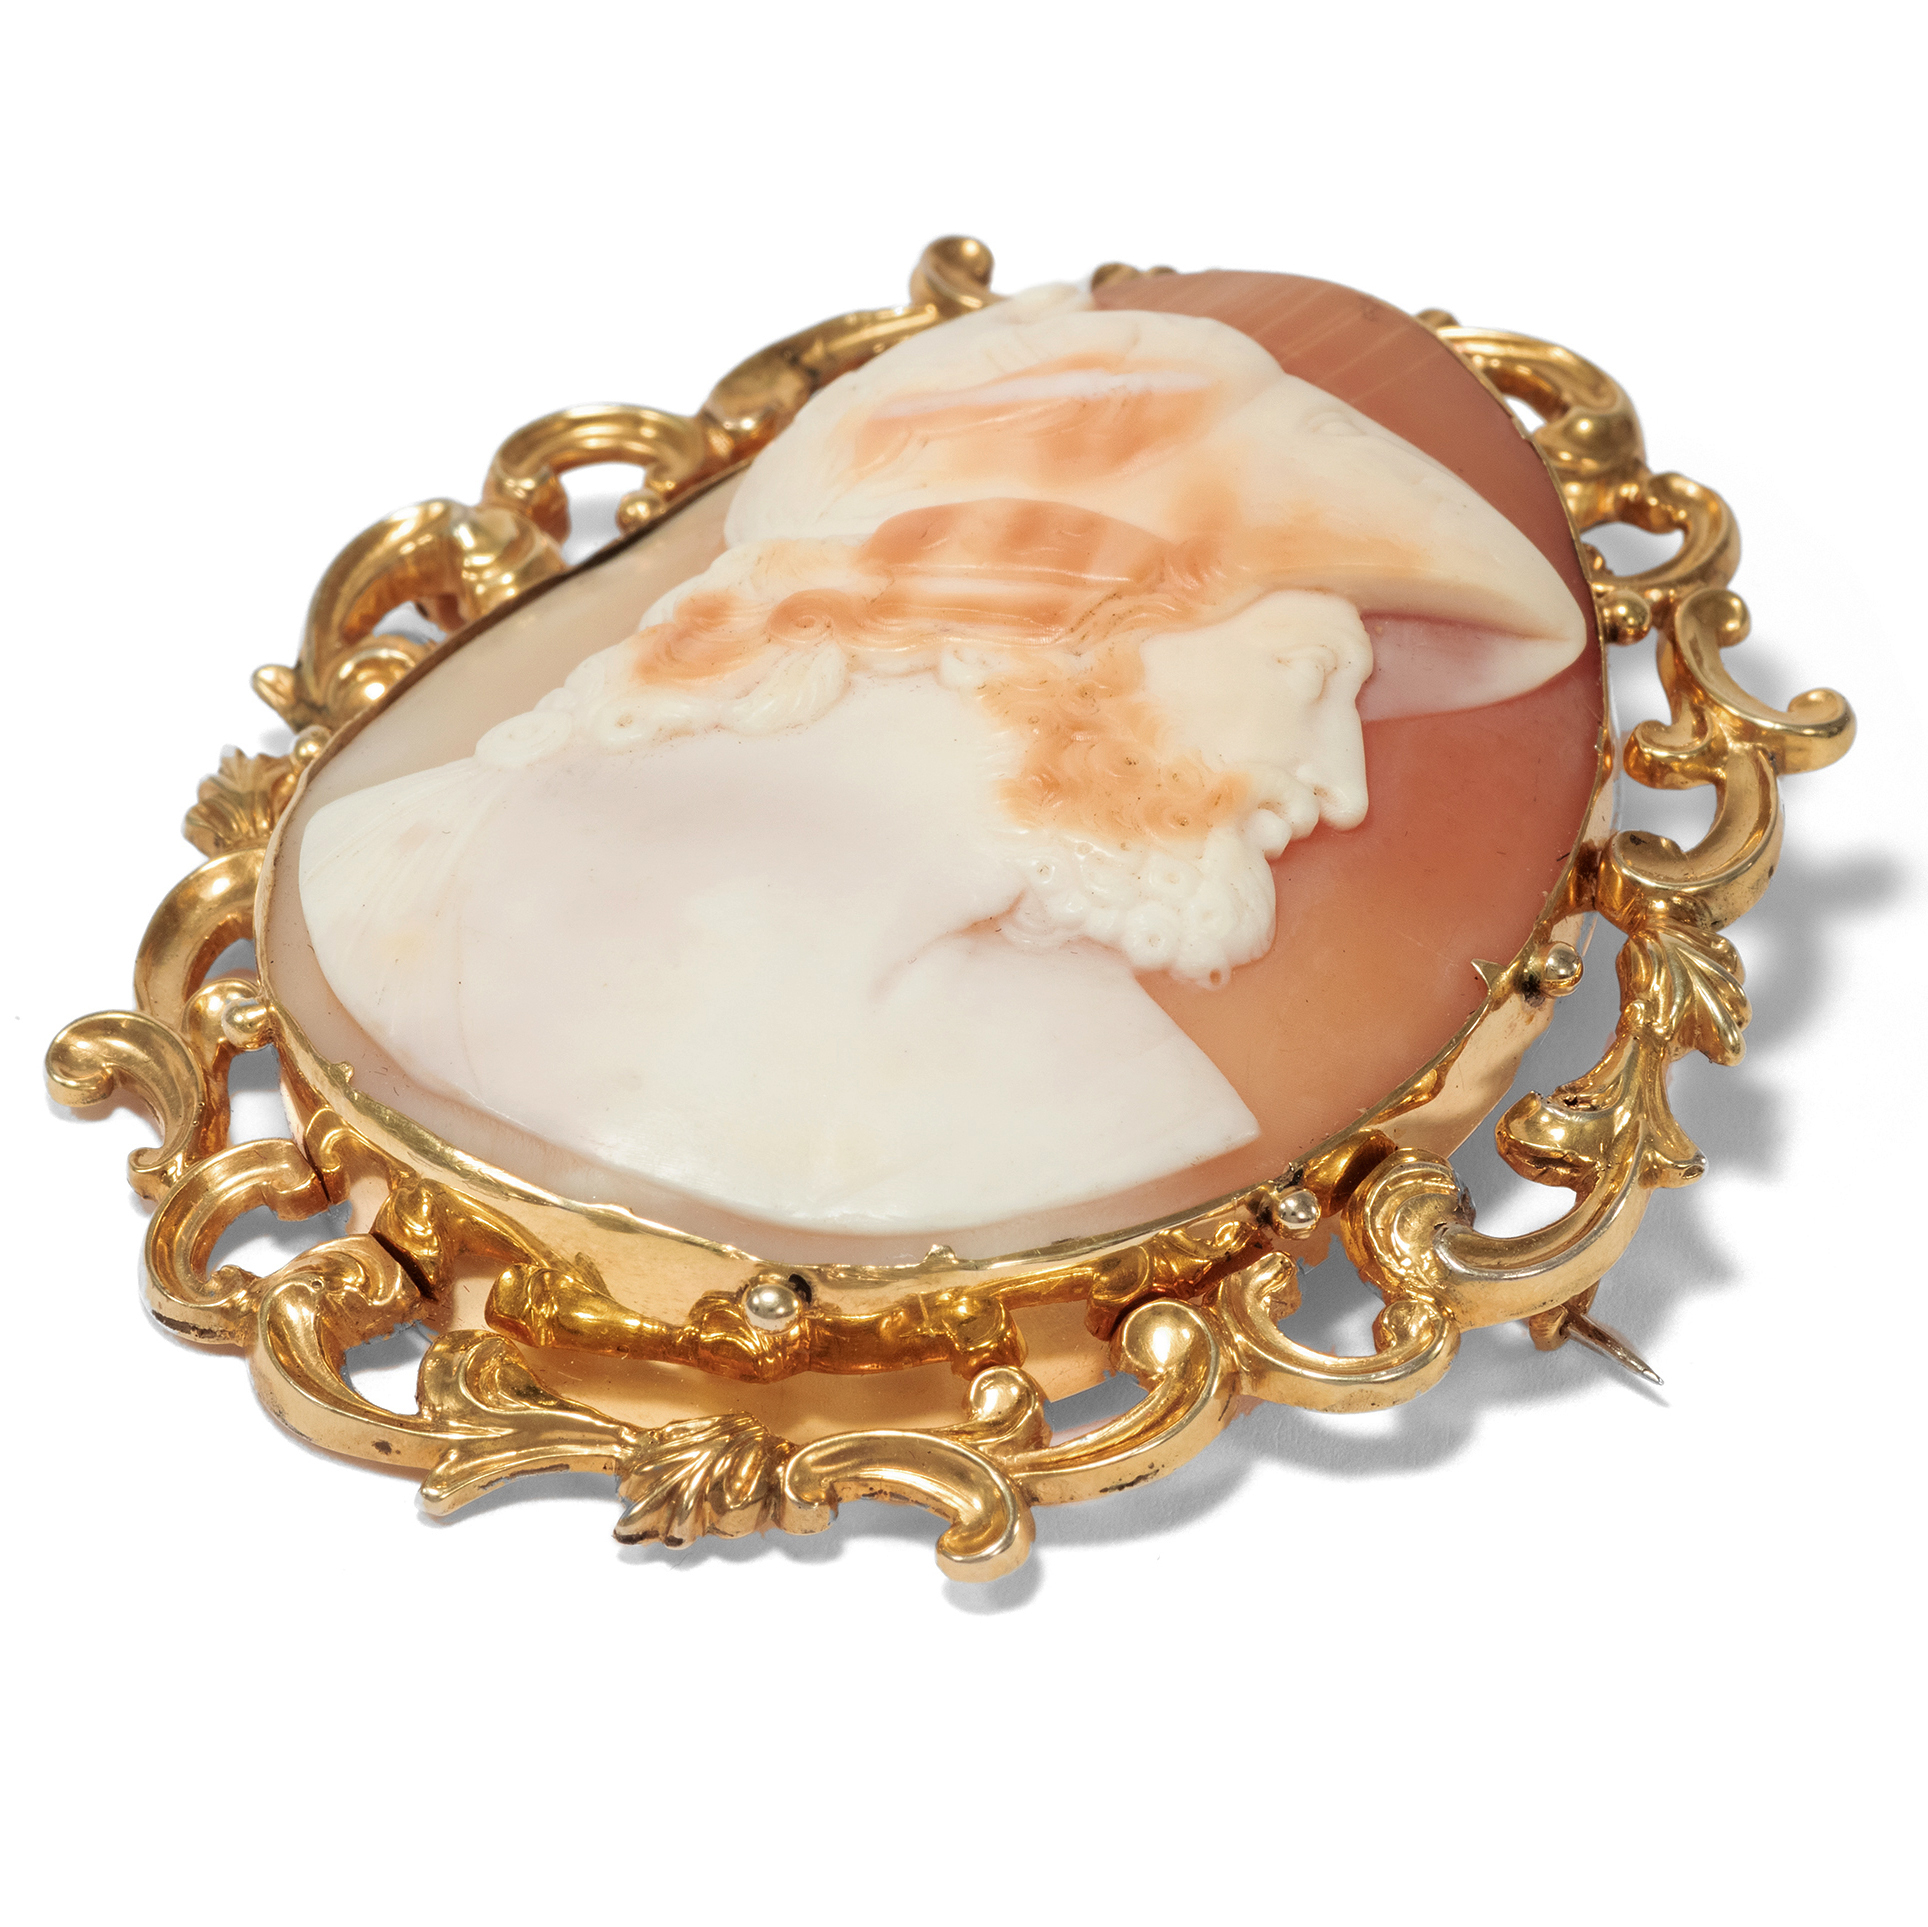 Antique shell cameo of Menelaos after Greek model in gold setting, around 1845